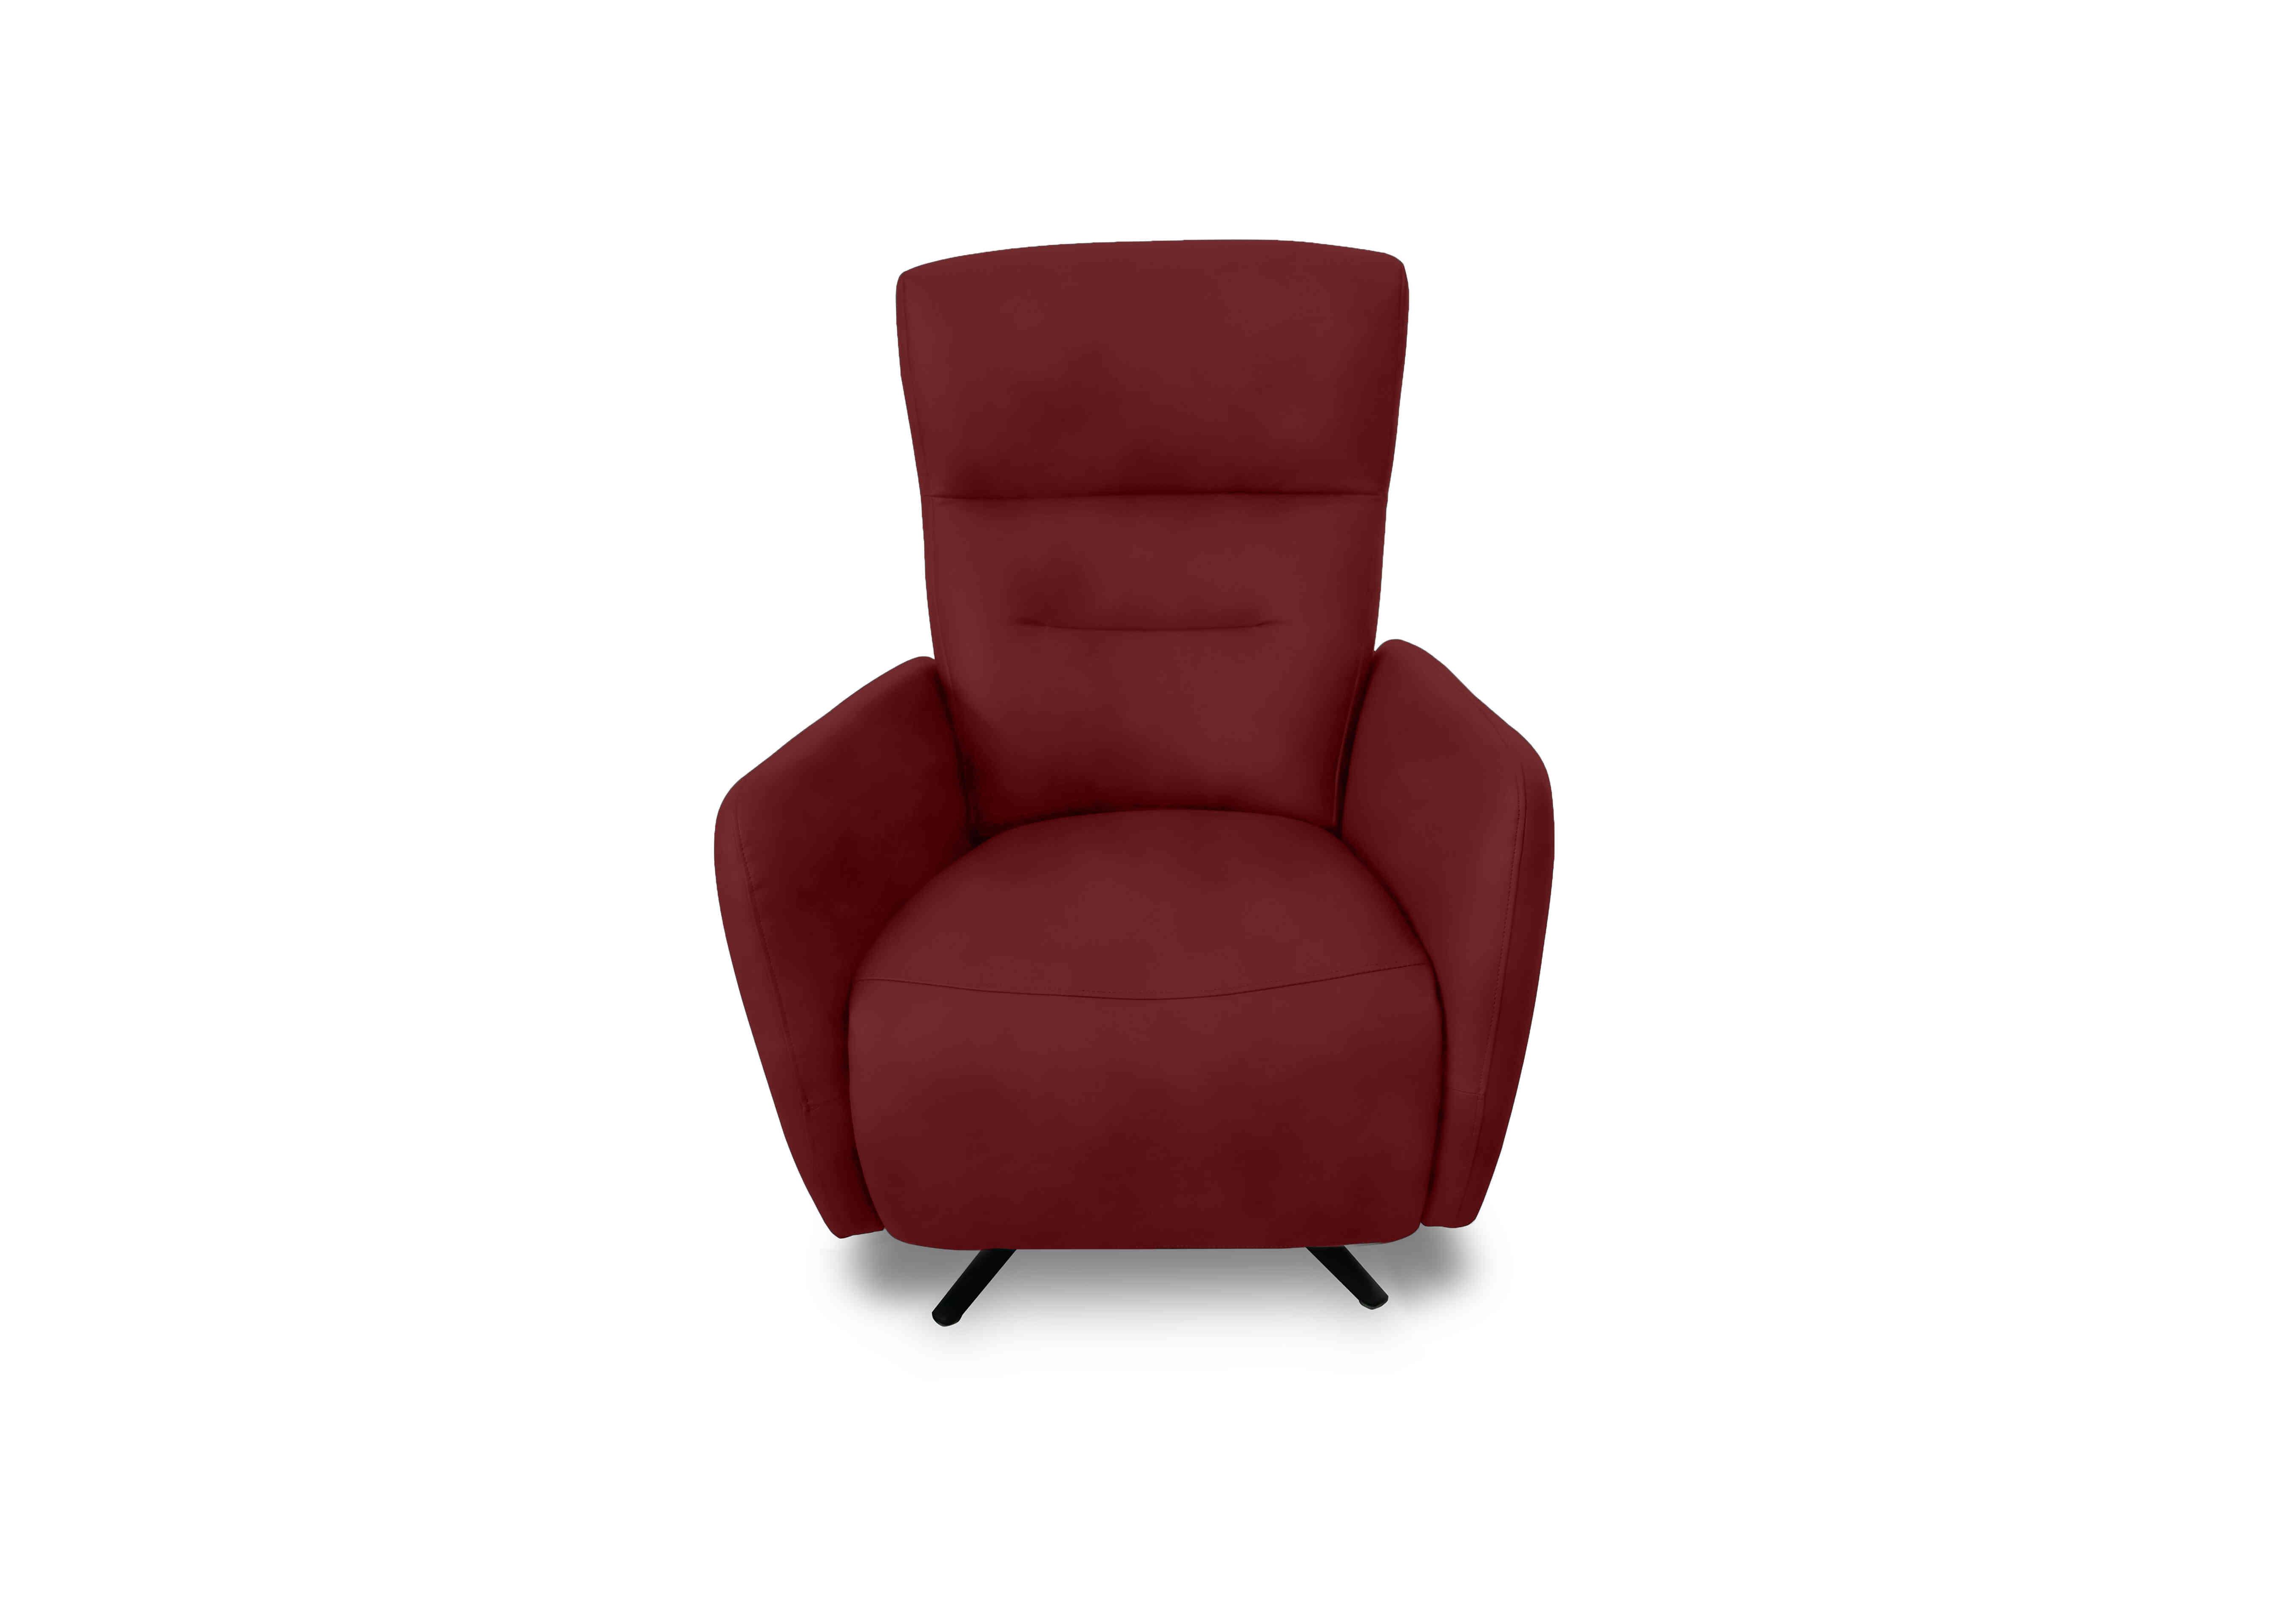 Designer Chair Collection Le Mans Fabric Dual Power Recliner Swivel Chair in Fab-Meg-R65 Burgundy on Furniture Village